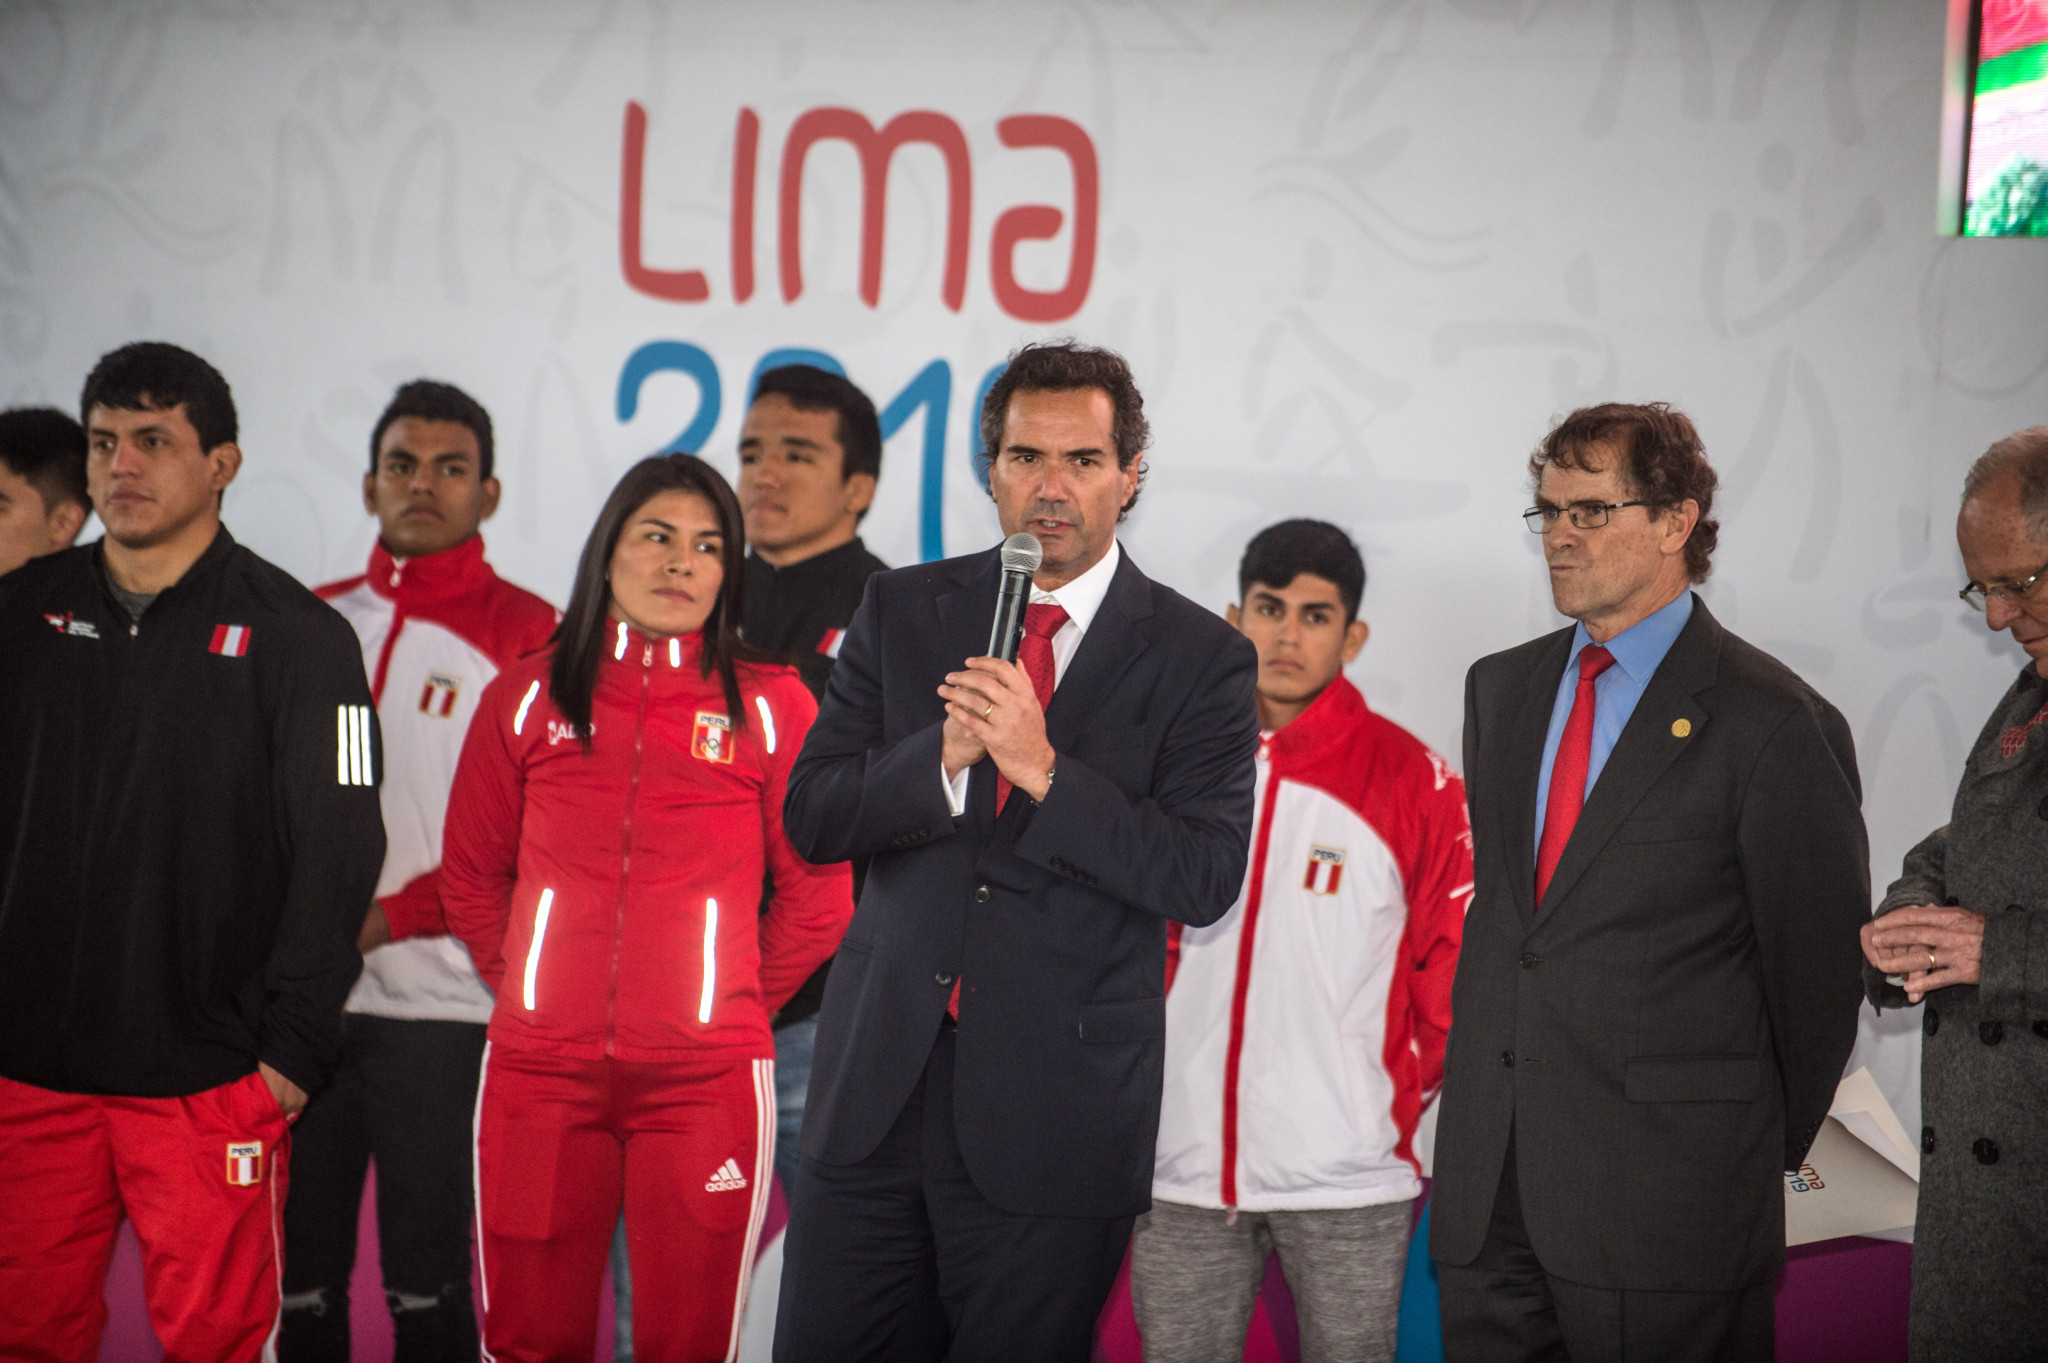 PanAmSports partially reclaim Lima 2019 marketing rights in return for clearing $3.3 million debt